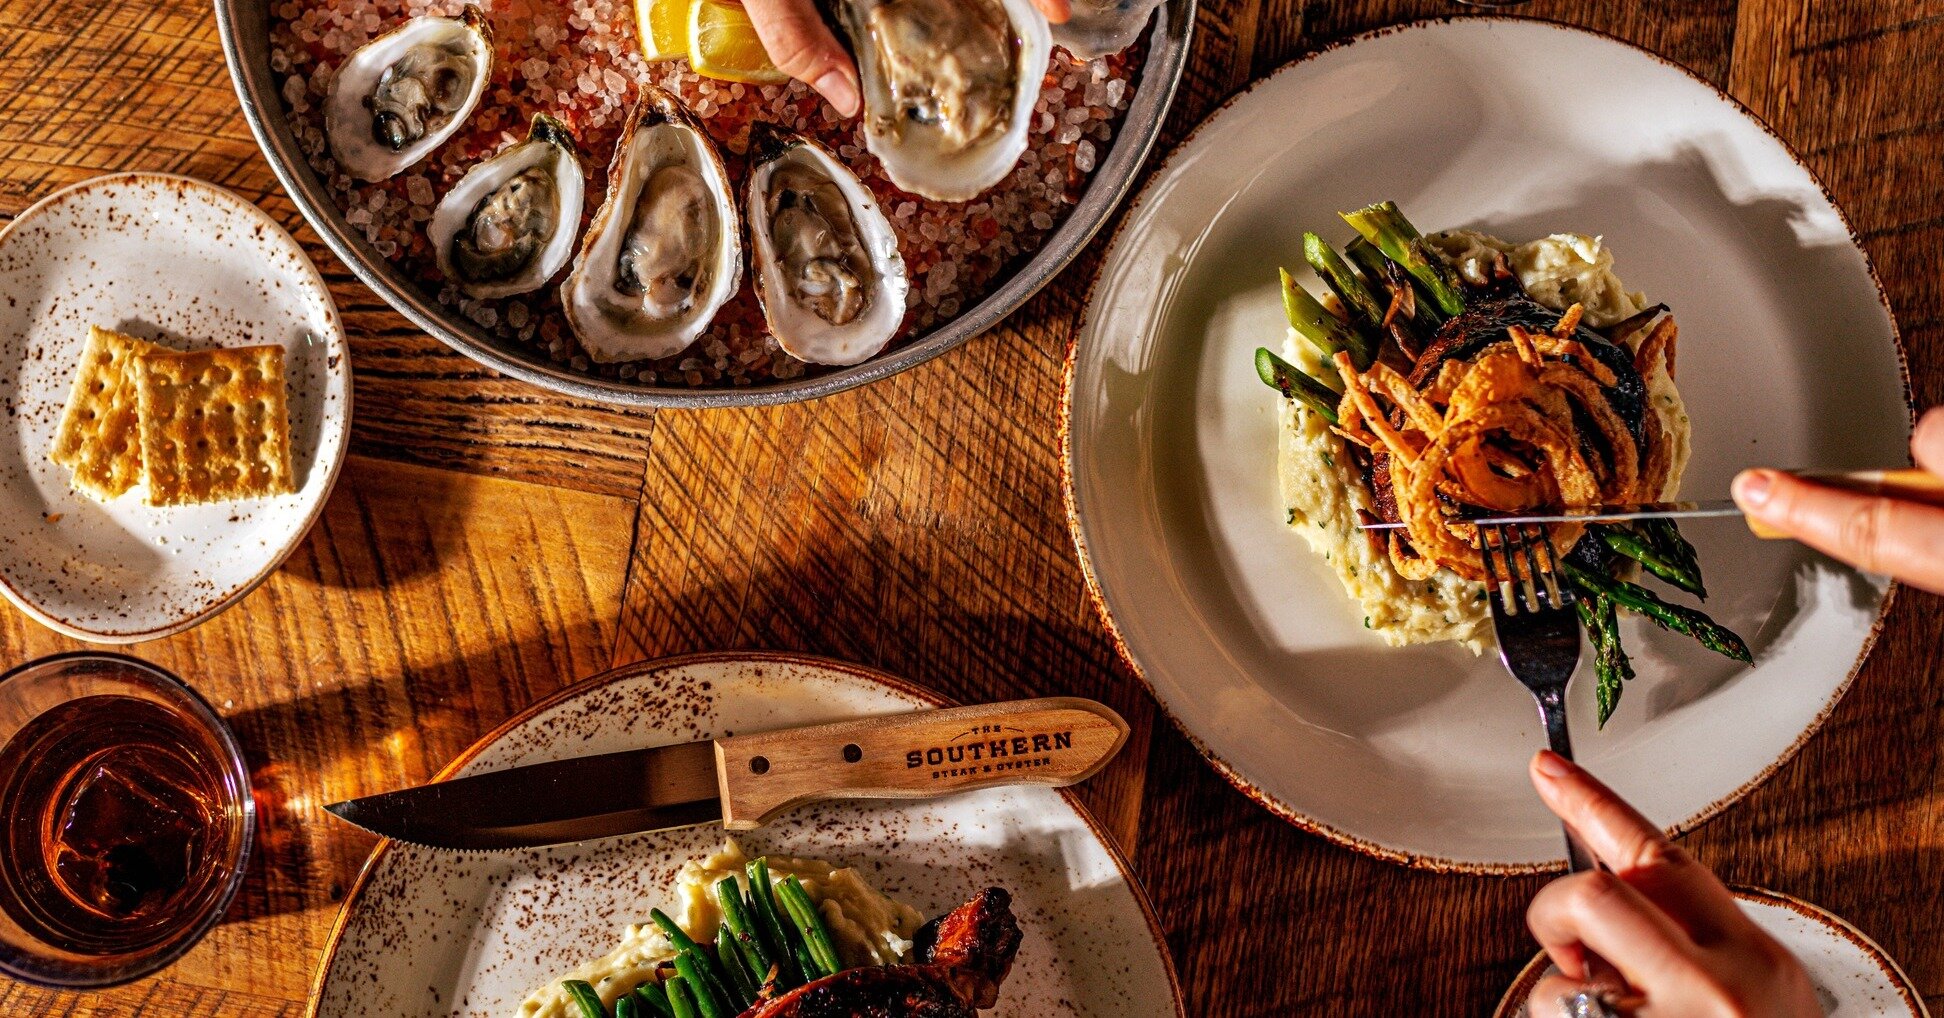 Uniquely Southern, Authentically Nashville. 

From the freshly shucked to-order oysters to the hickory wood-fired steaks, Southern hospitality goes into every dish we prepare and share with our guests.

Secure your reservation today to experience aut